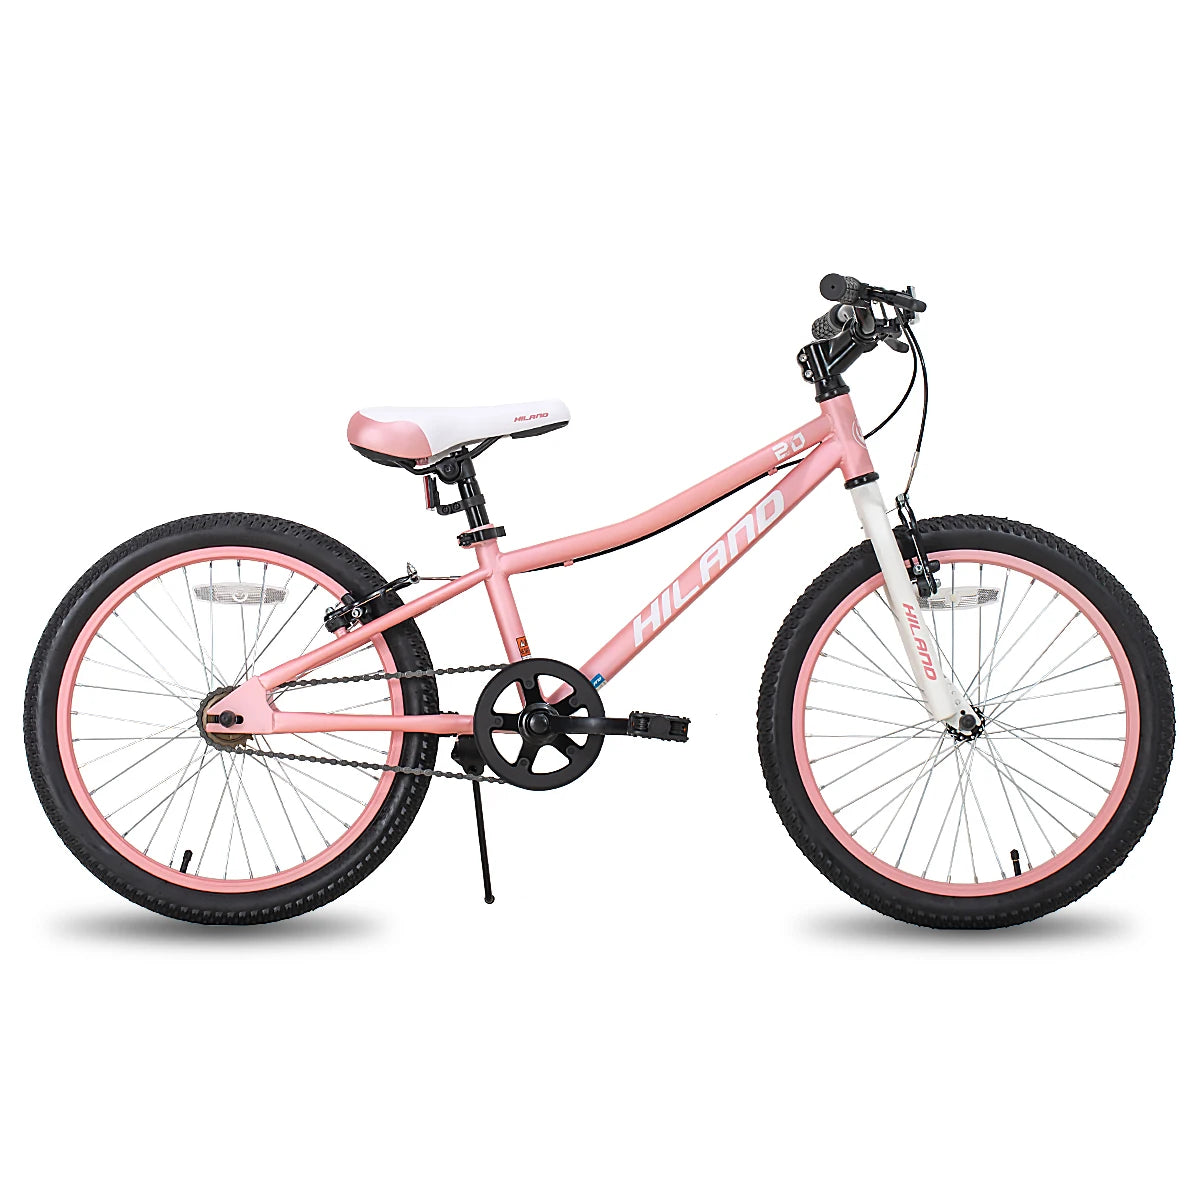 HILAND Children 20 inch wheel single speed  Bike MTB and Road Bike with front and rear V-brake